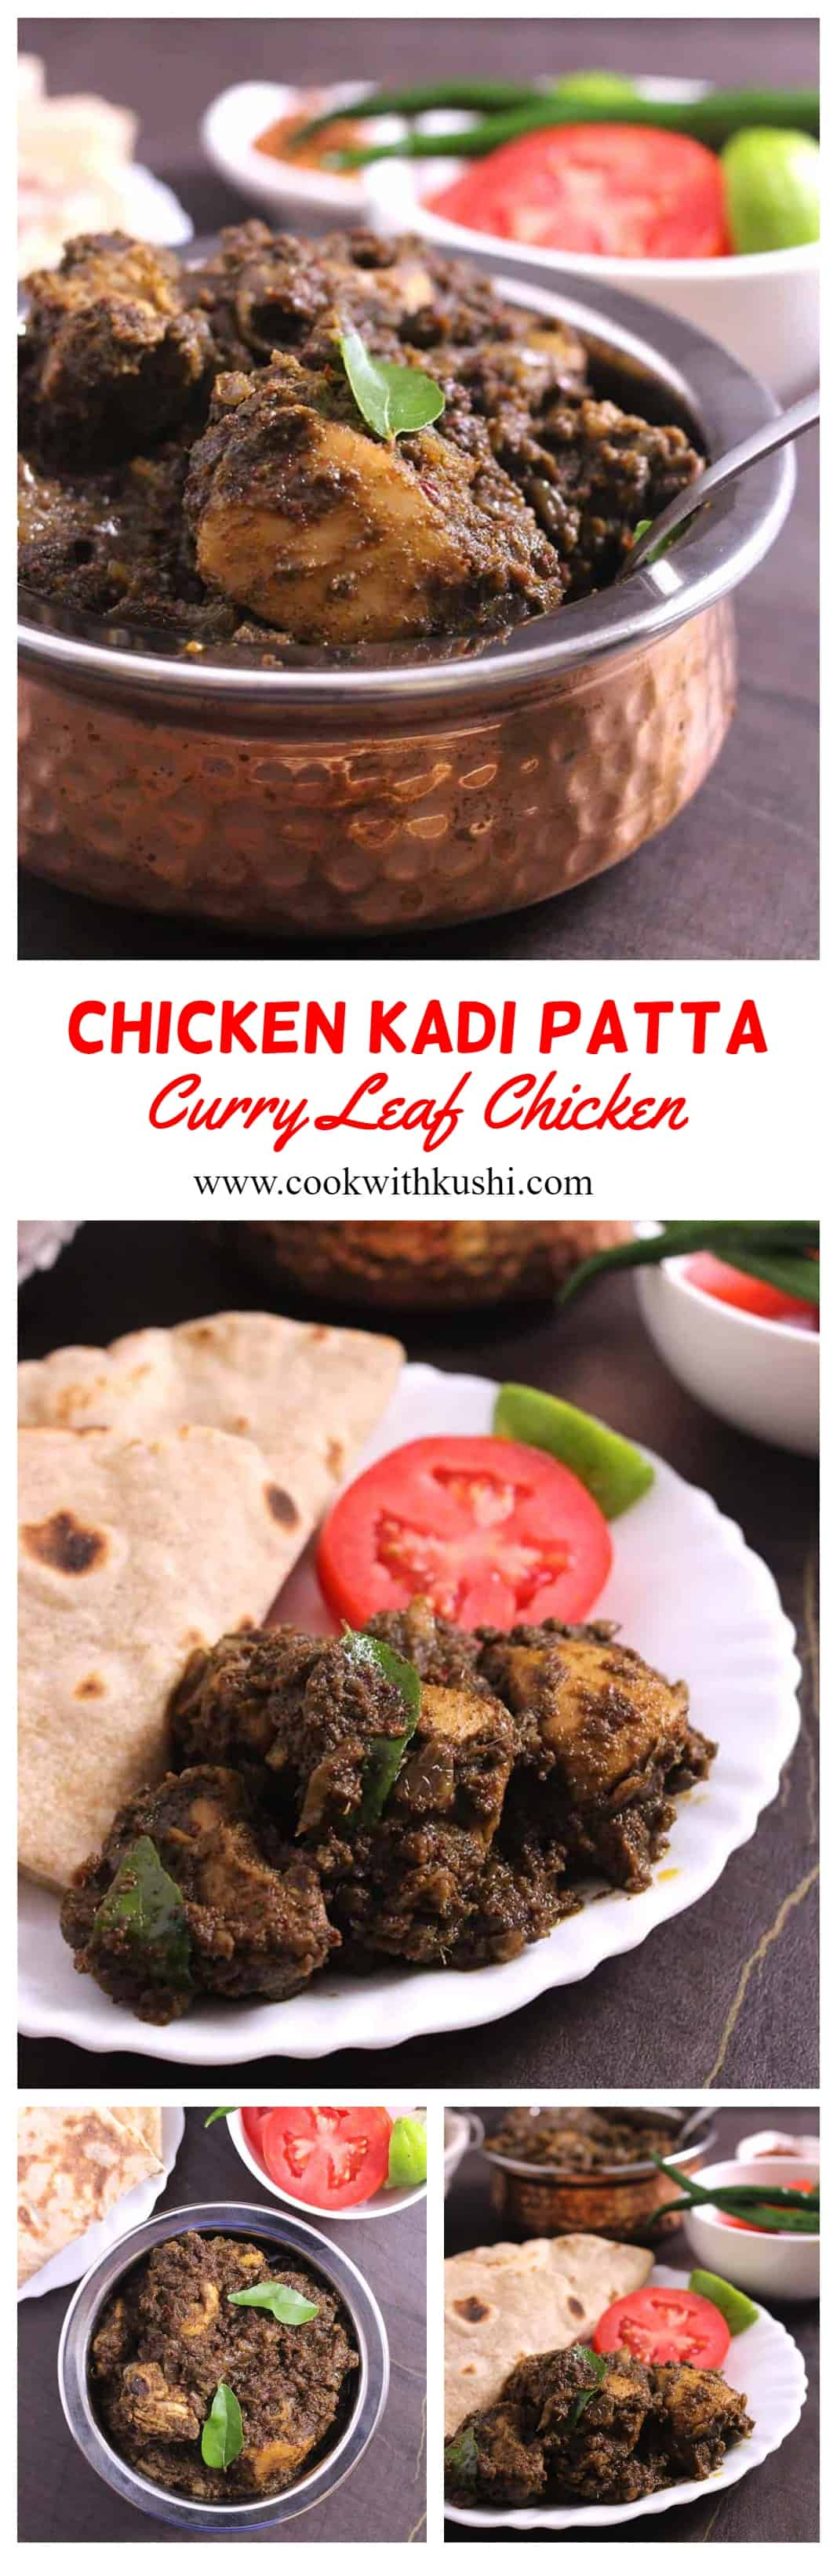 Chicken Kadi Patta is a delicious, spicy, and aromatic chicken dish from South Indian cuisine prepared using curry leaves, peppercorns, and a few fragrant spices. #chickencurry #chickenrecipes #dinnerideas #Indianrecipes